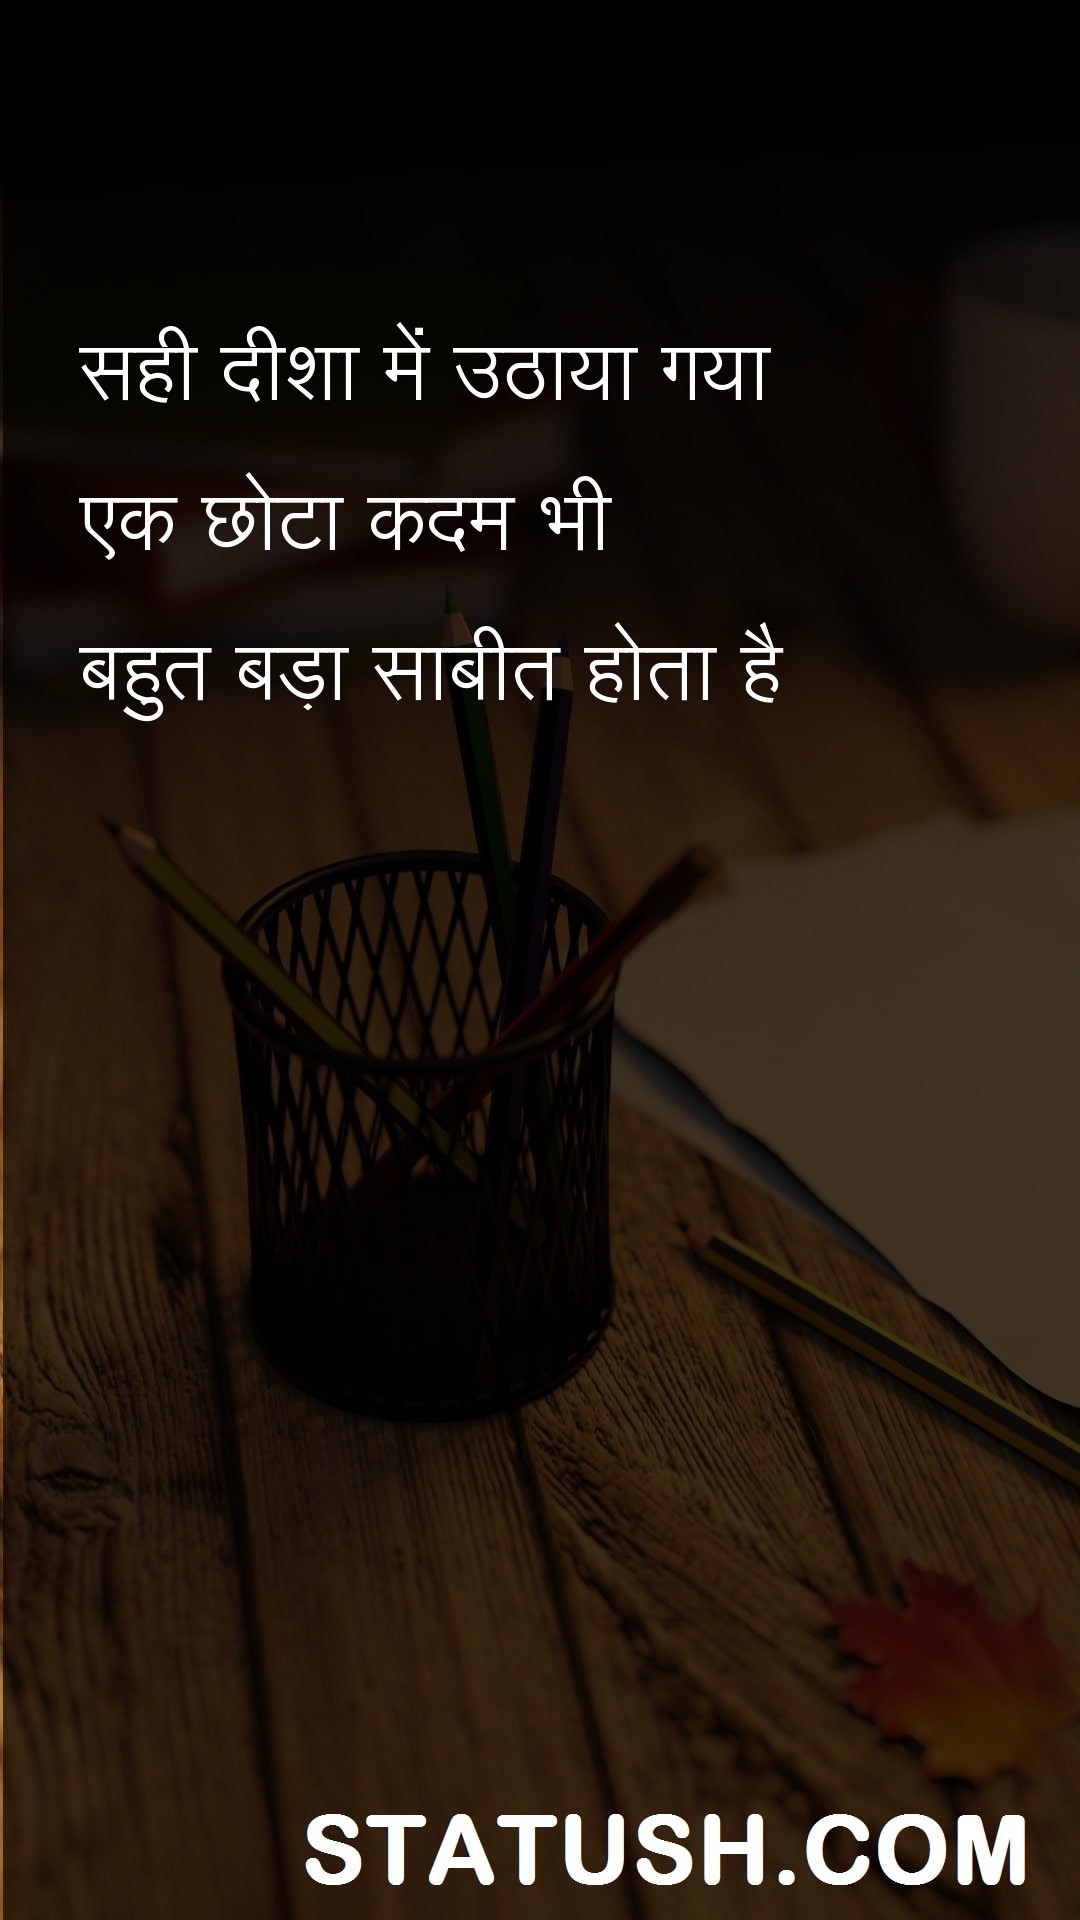 Even a small step in the right - Hindi Quotes at statush.com